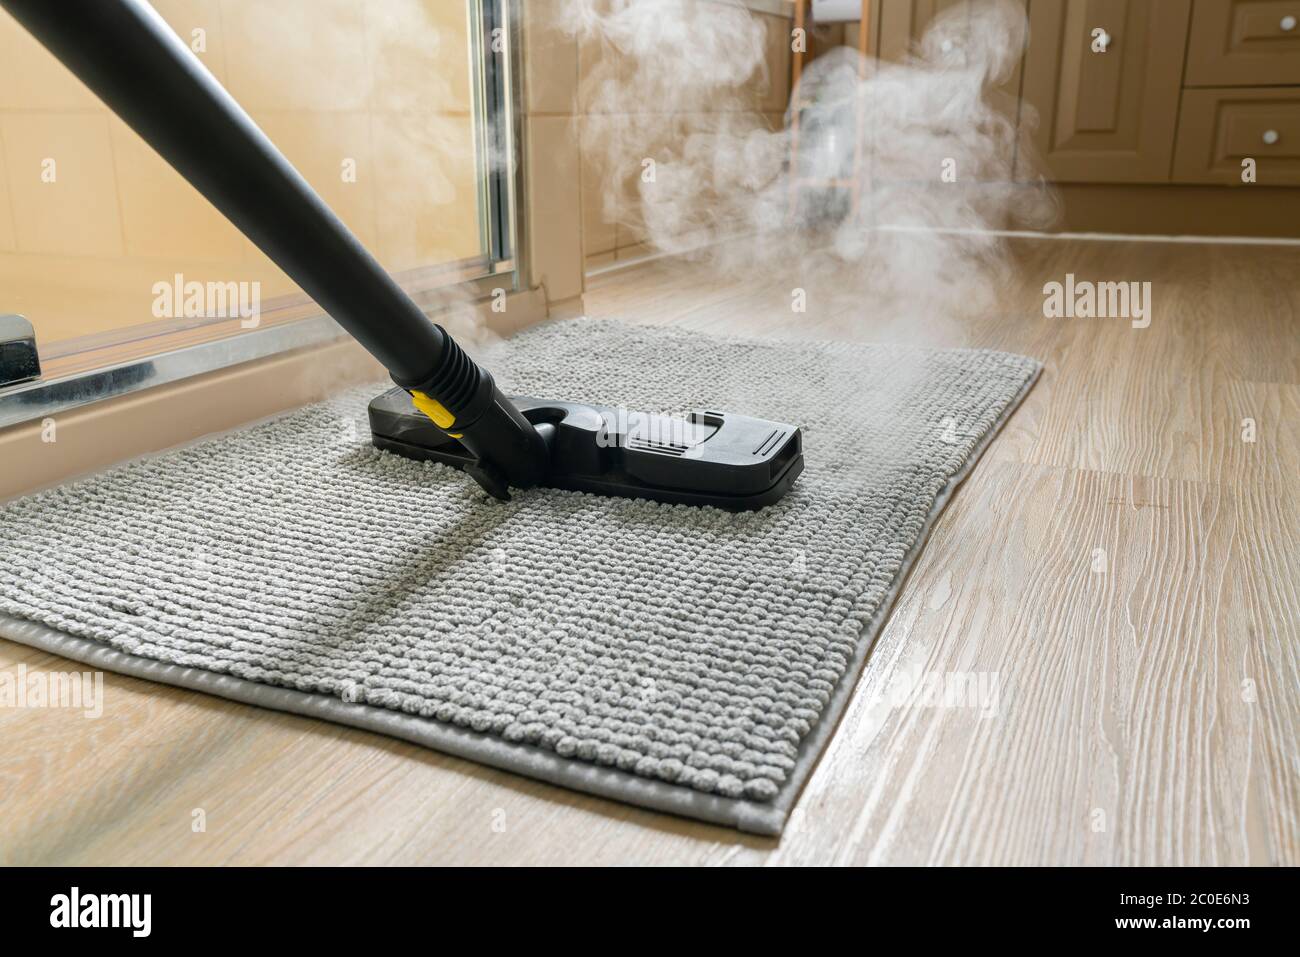 Cleaning bathroom mat using steam cleaner Stock Photo